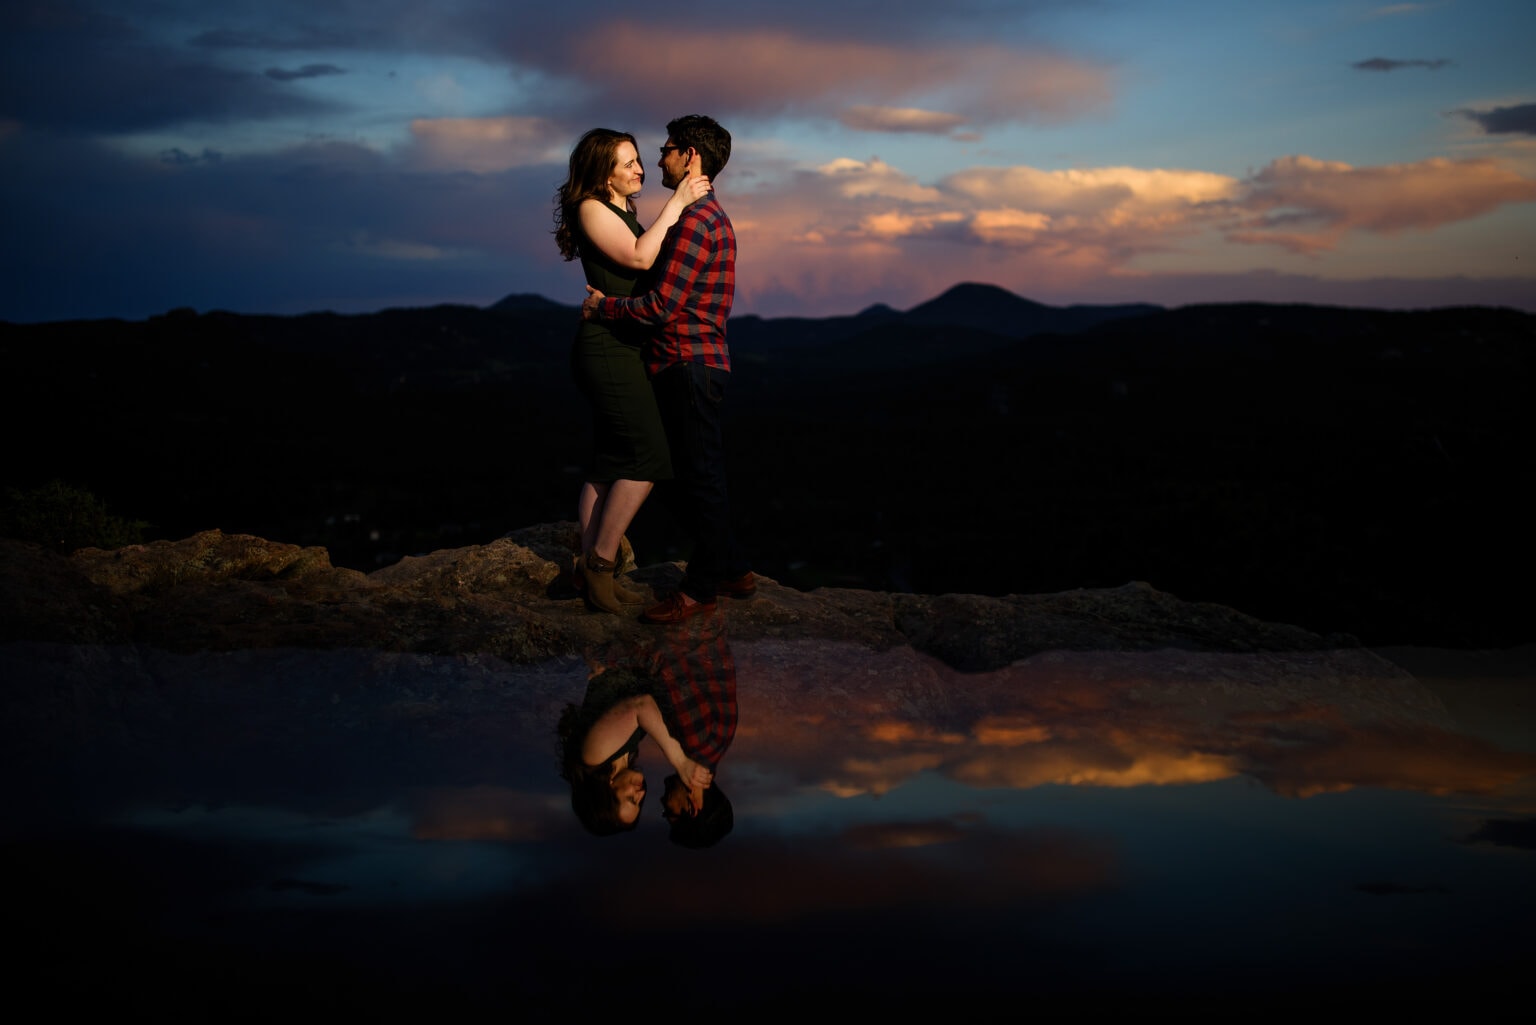 Felicia and Dan are reflected in a pond during sunset atop Brothers Lookout in Alderfer/Three Sisters Park in Evergreen